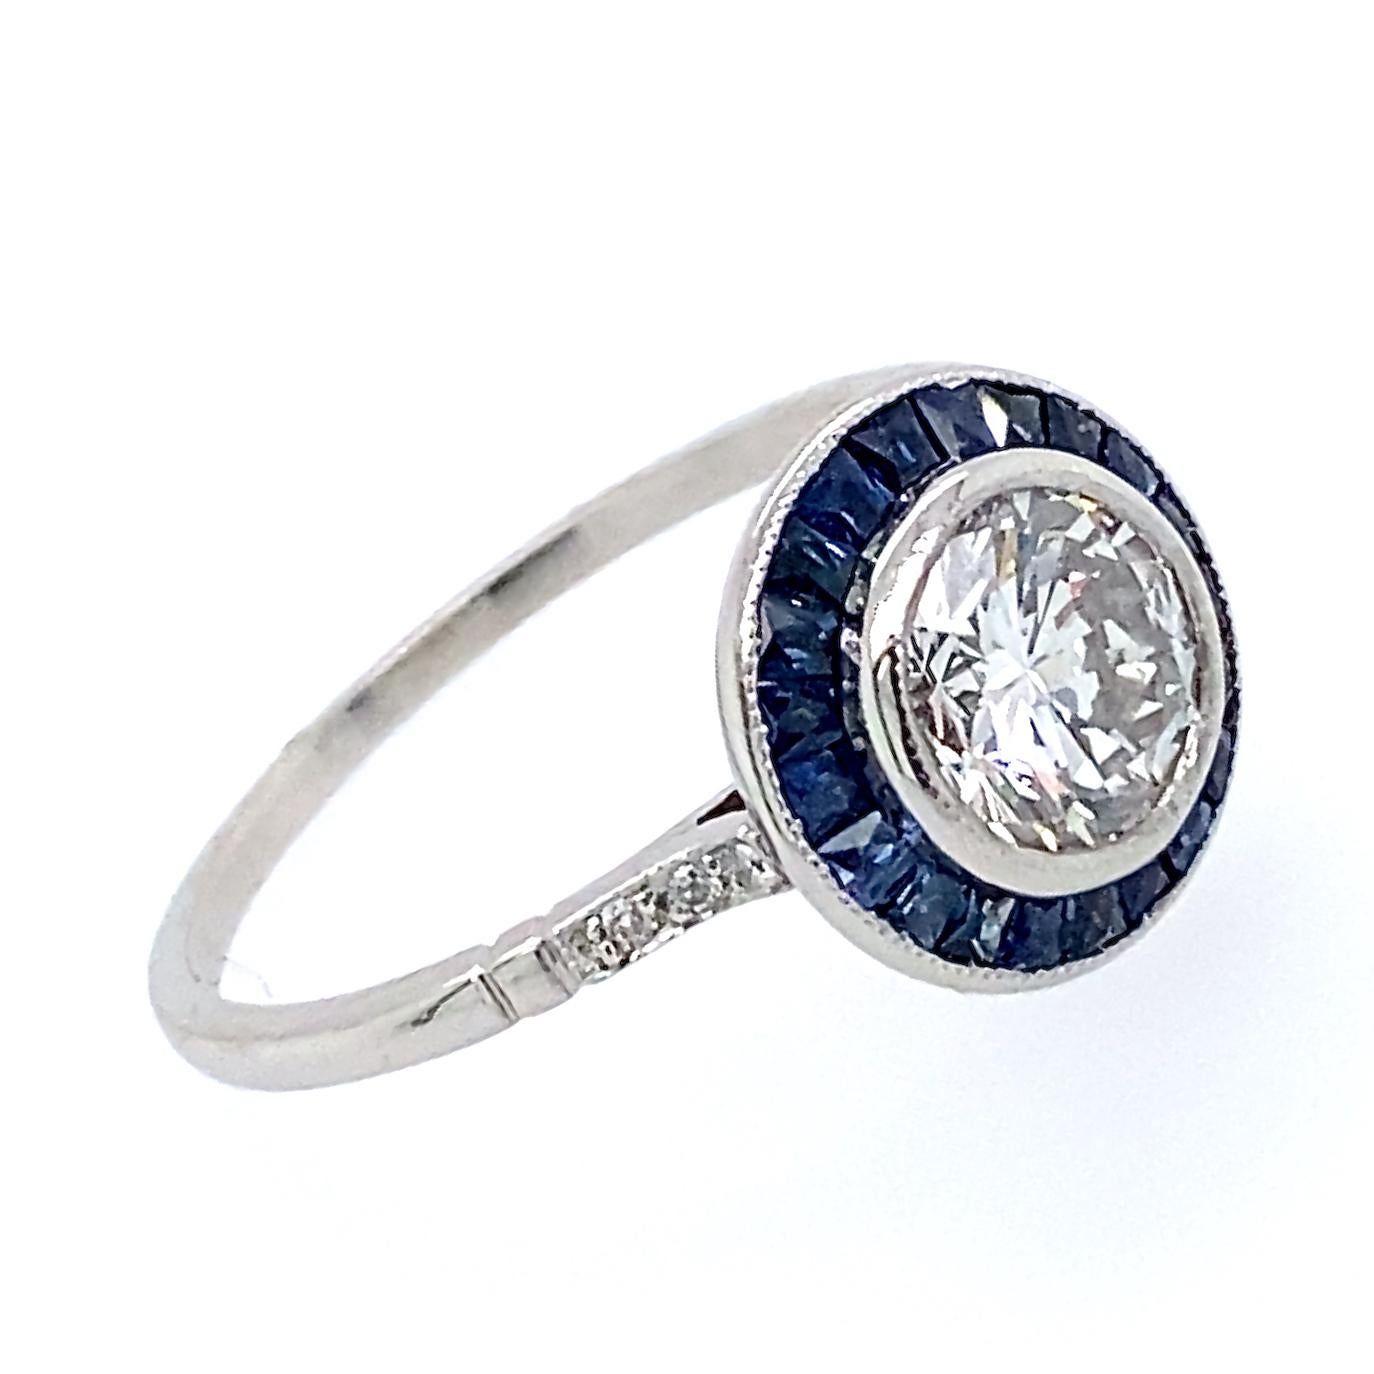 Art Deco GIA Certified 1.19 Carat Diamond with Sapphire Halo in Deco-Style Platinum Ring